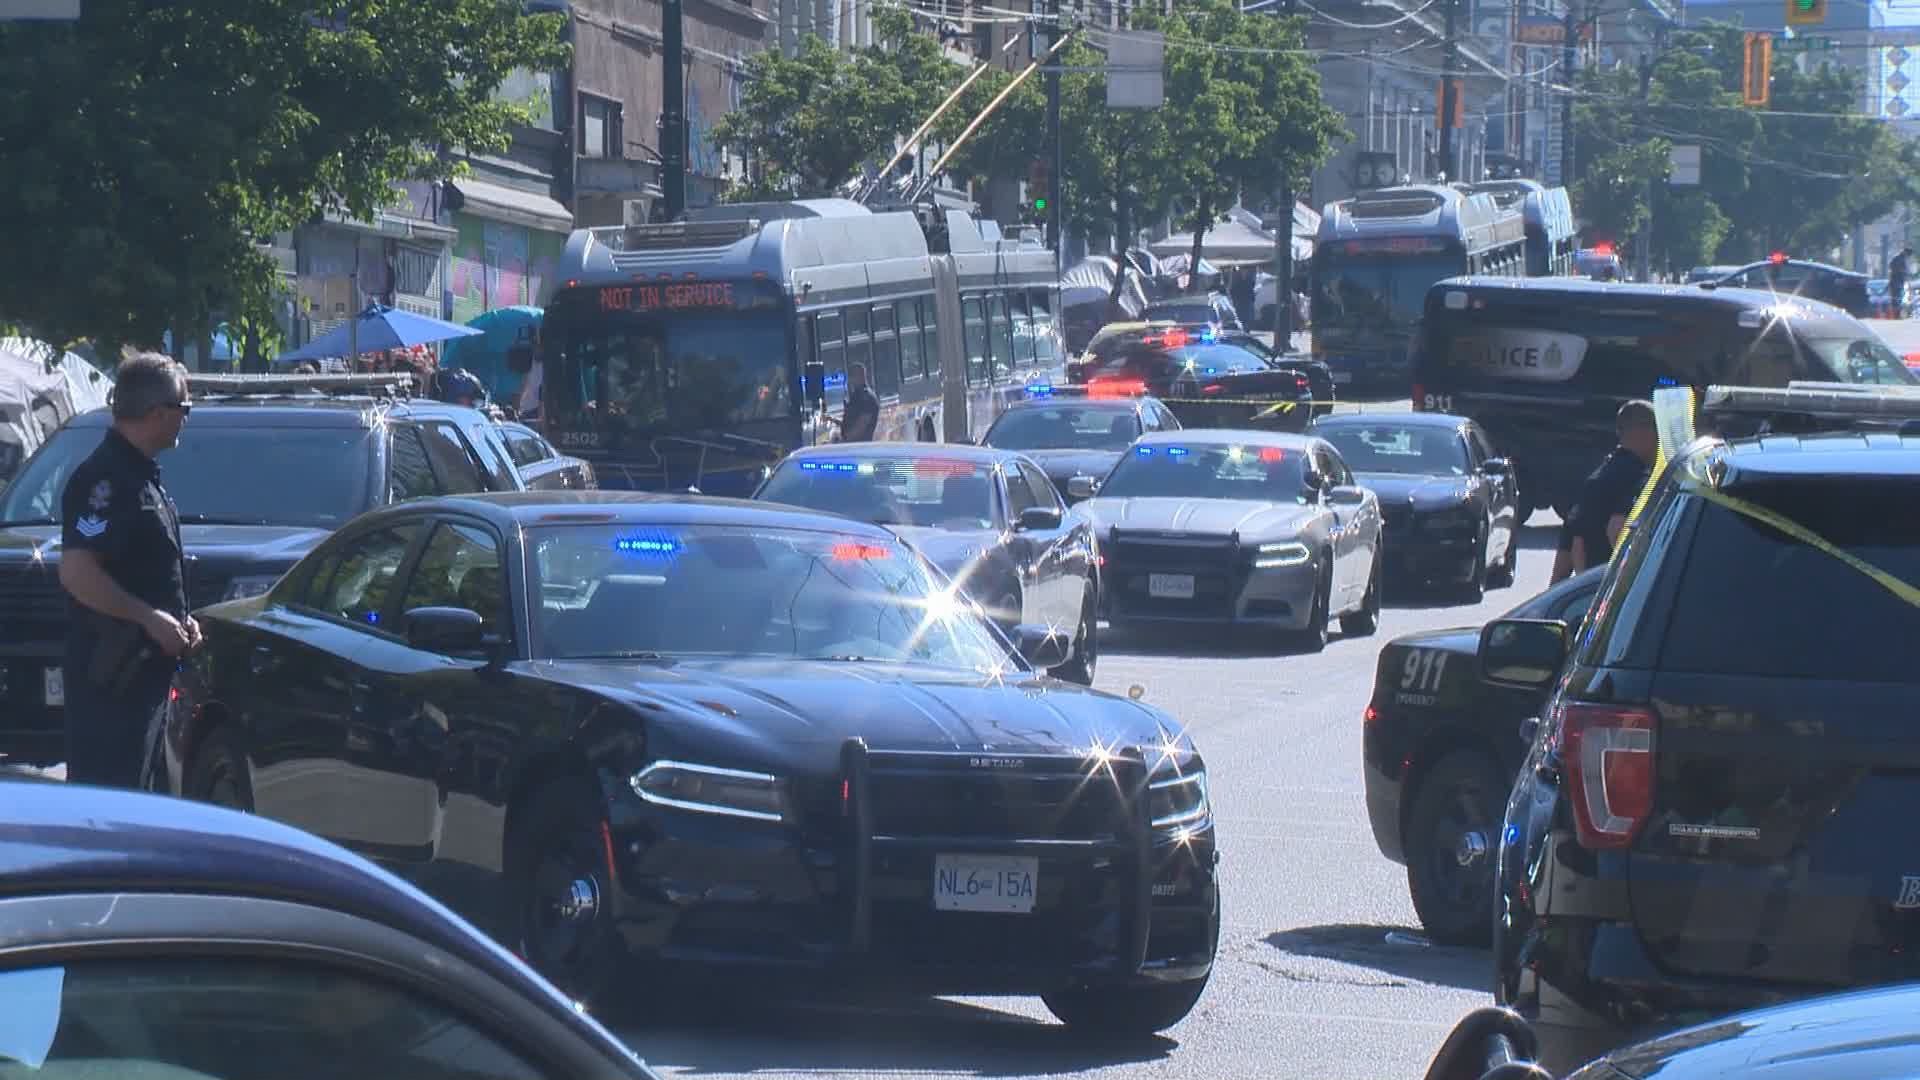 Dozens of VPD officers were seen in downtown Vancouver on Saturday.